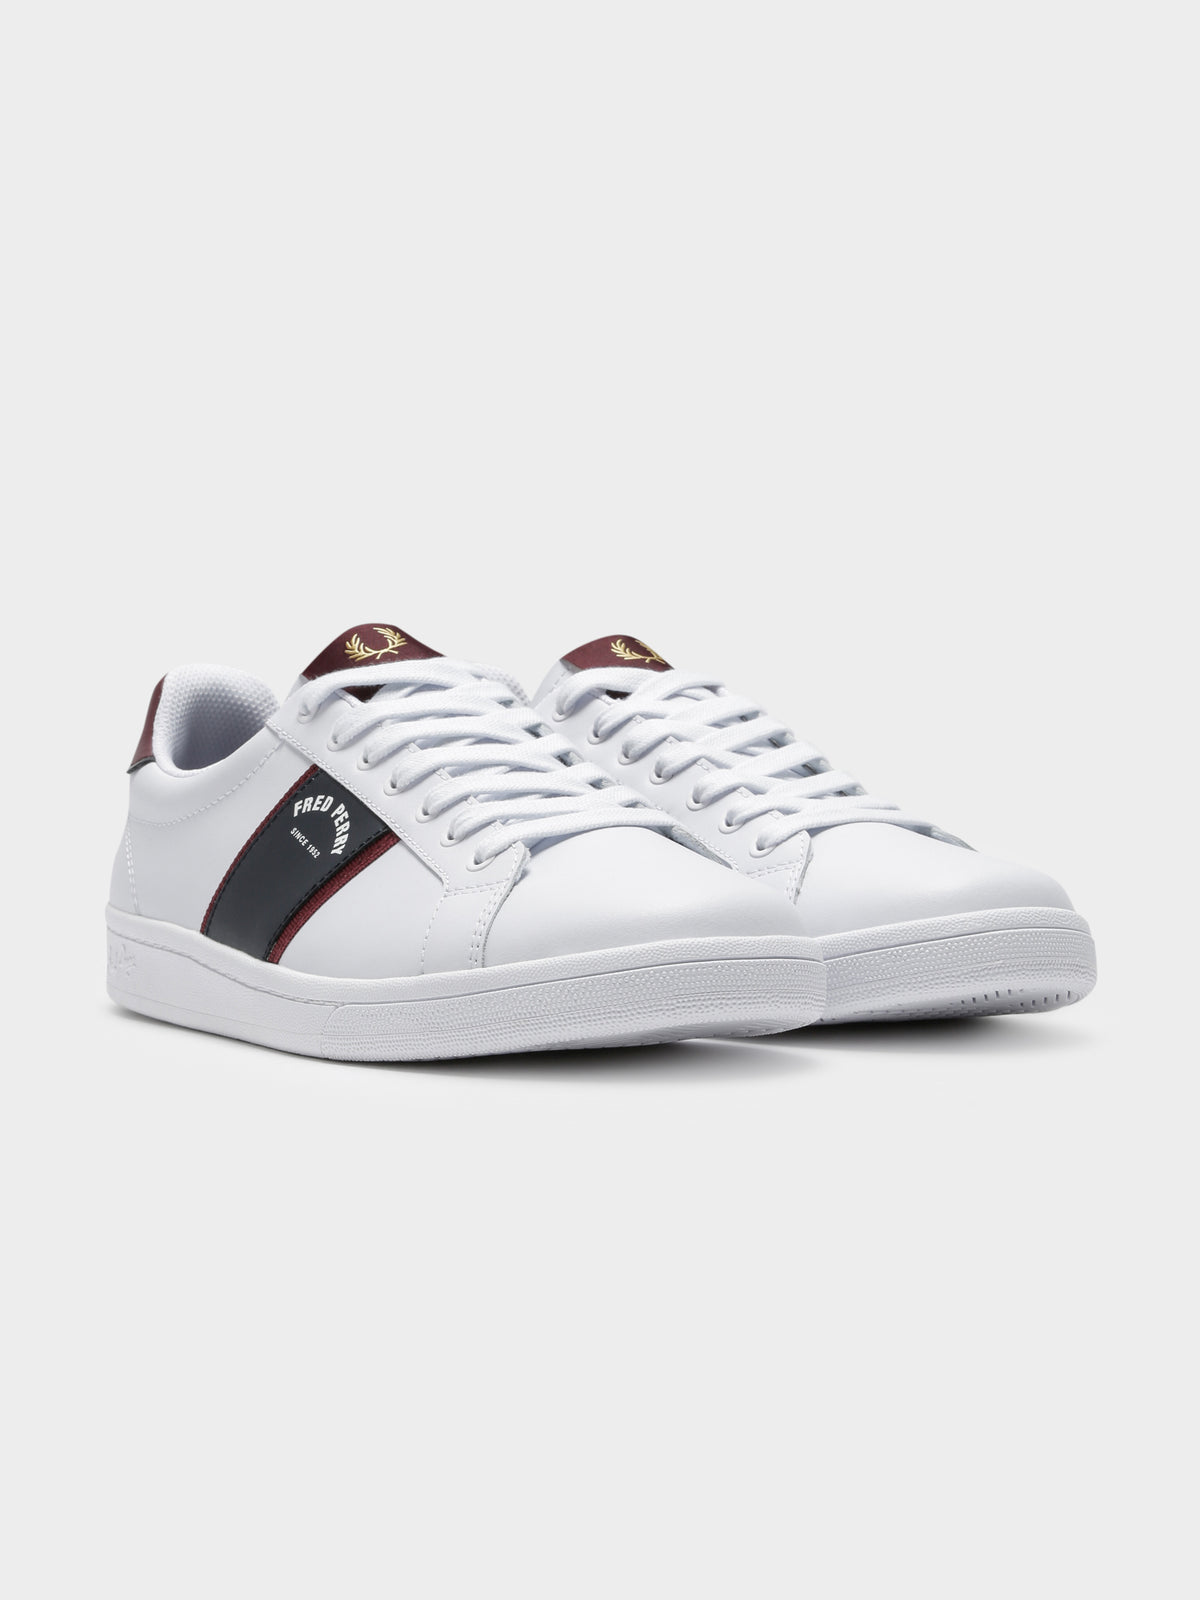 Mens B721 Arch Branded Sneakers in White